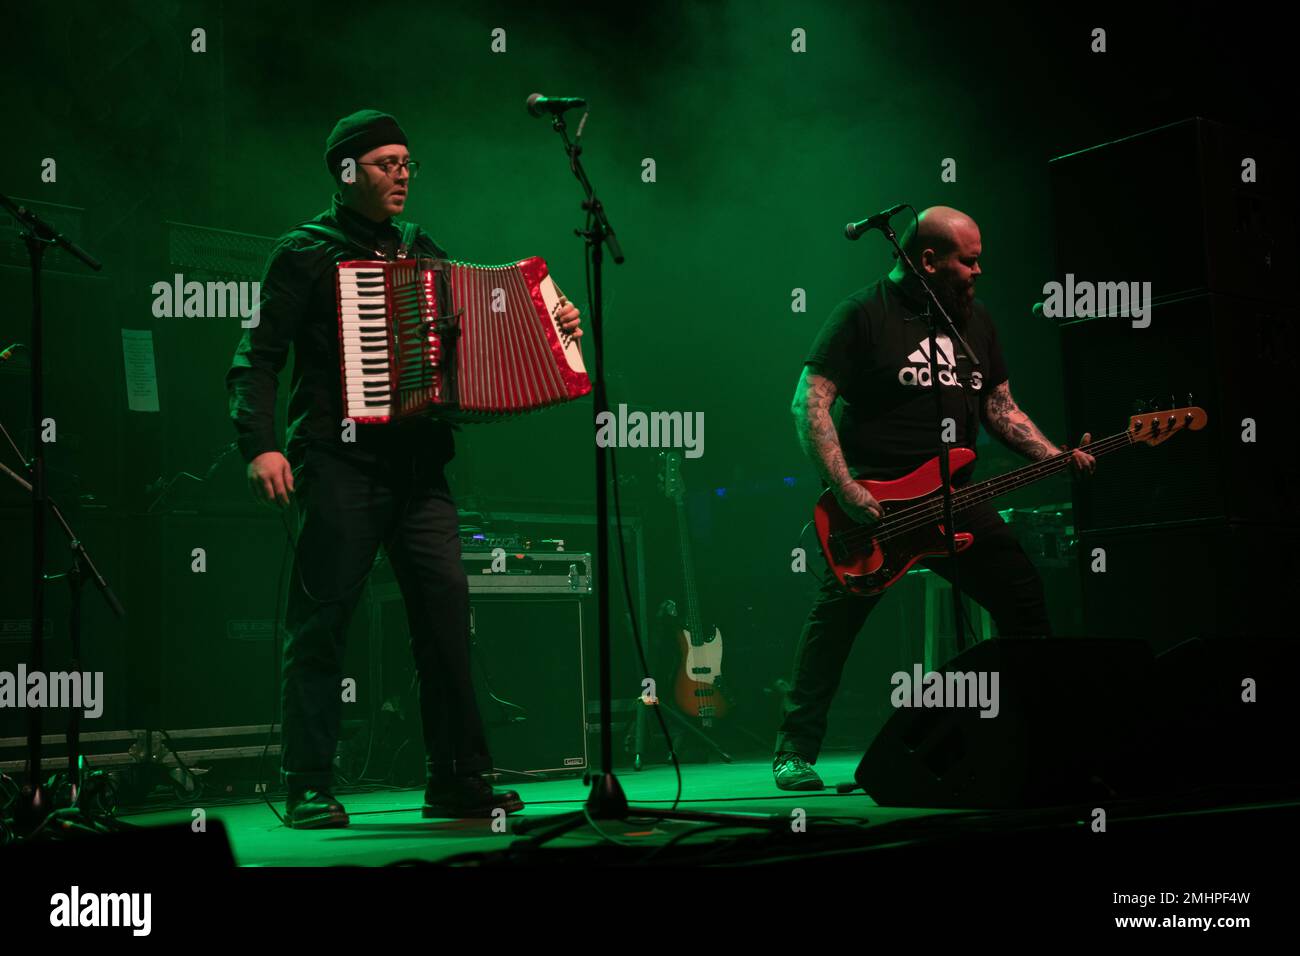 Australian punk-folk band, The Rumjacks, performing live in Hannover while opening for the Dropkick Murphys in Europe 2023 tour. Stock Photo